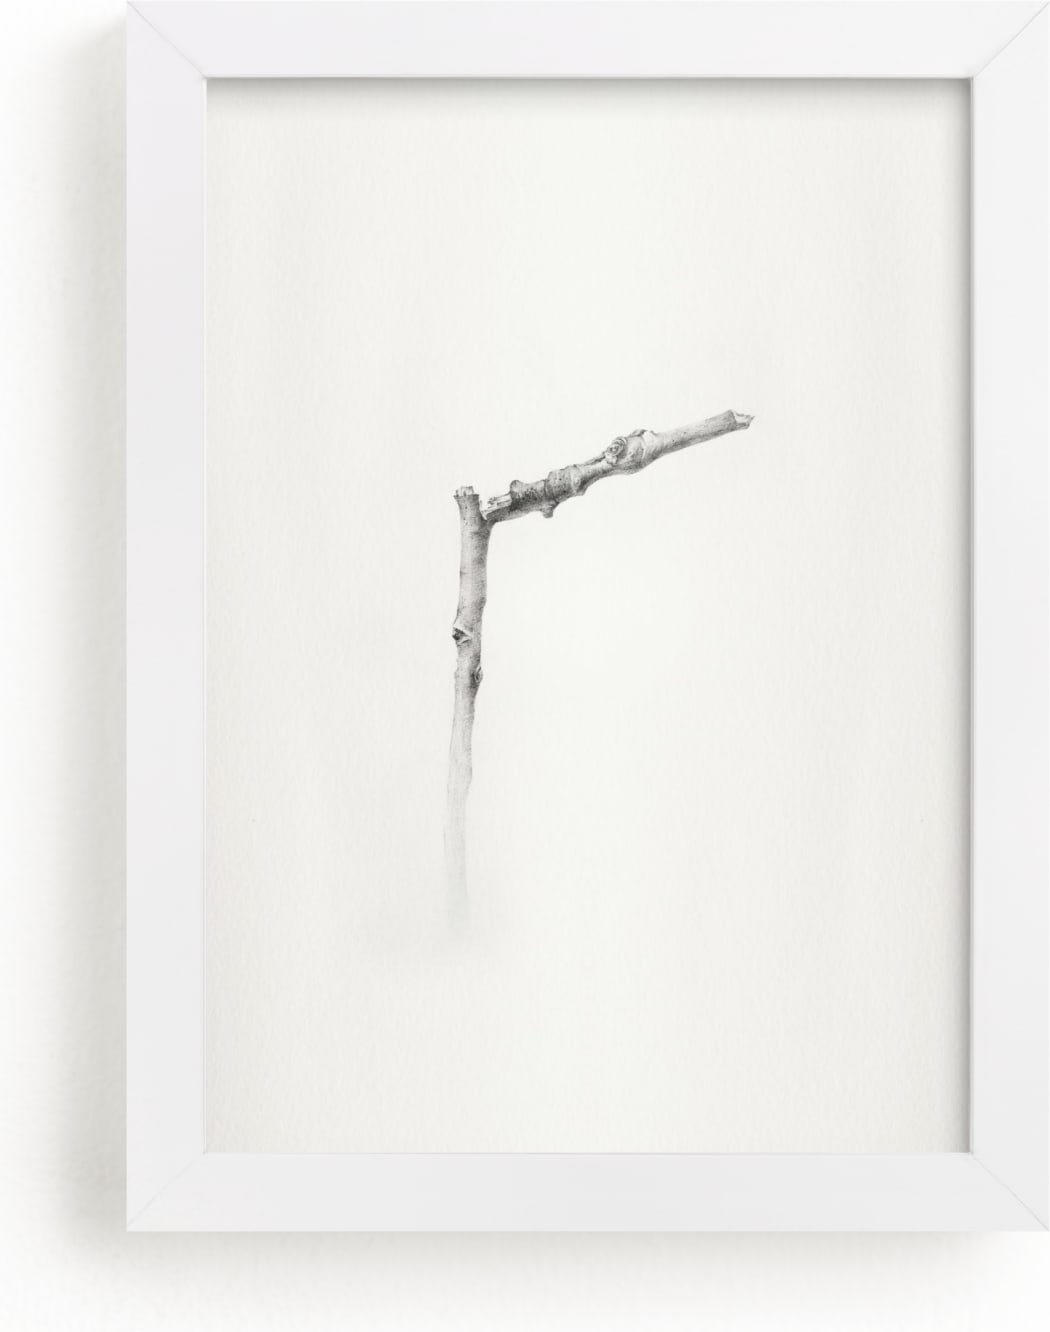 This is a white art by jinseikou called Twig- Solitude 01.